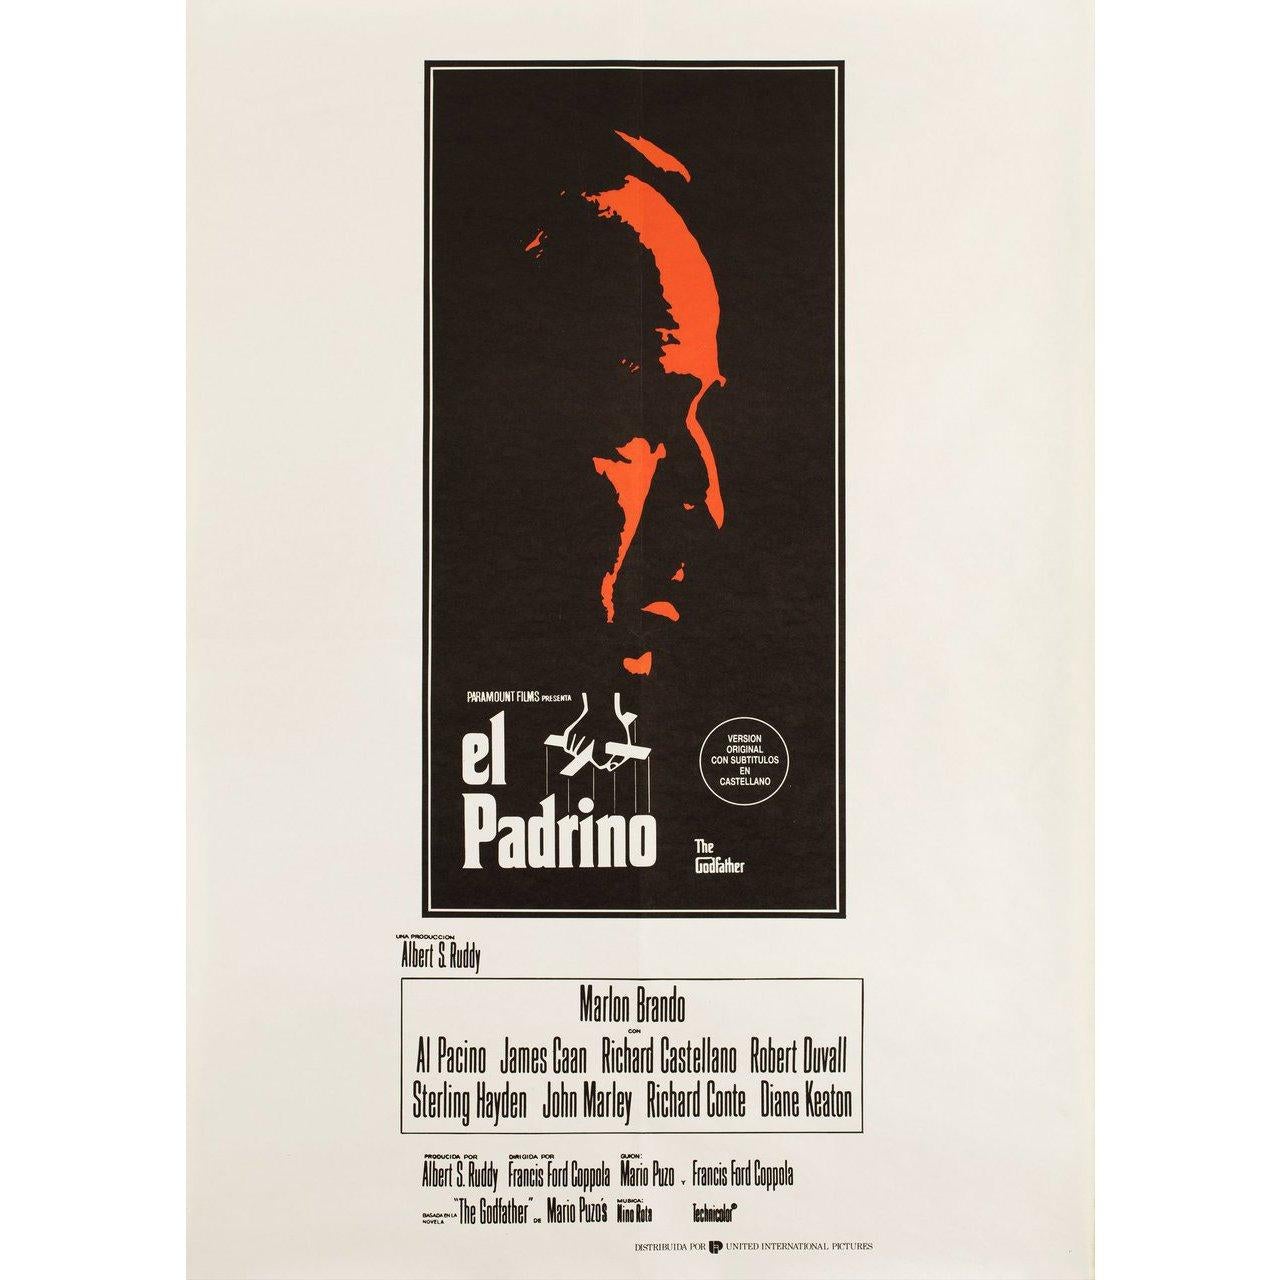 Original 1980s re-release Spanish B1 poster for the 1972 film The Godfather directed by Francis Ford Coppola with Marlon Brando / Al Pacino / James Caan / Richard S. Castellano. Very Good-Fine condition, folded. Many original posters were issued